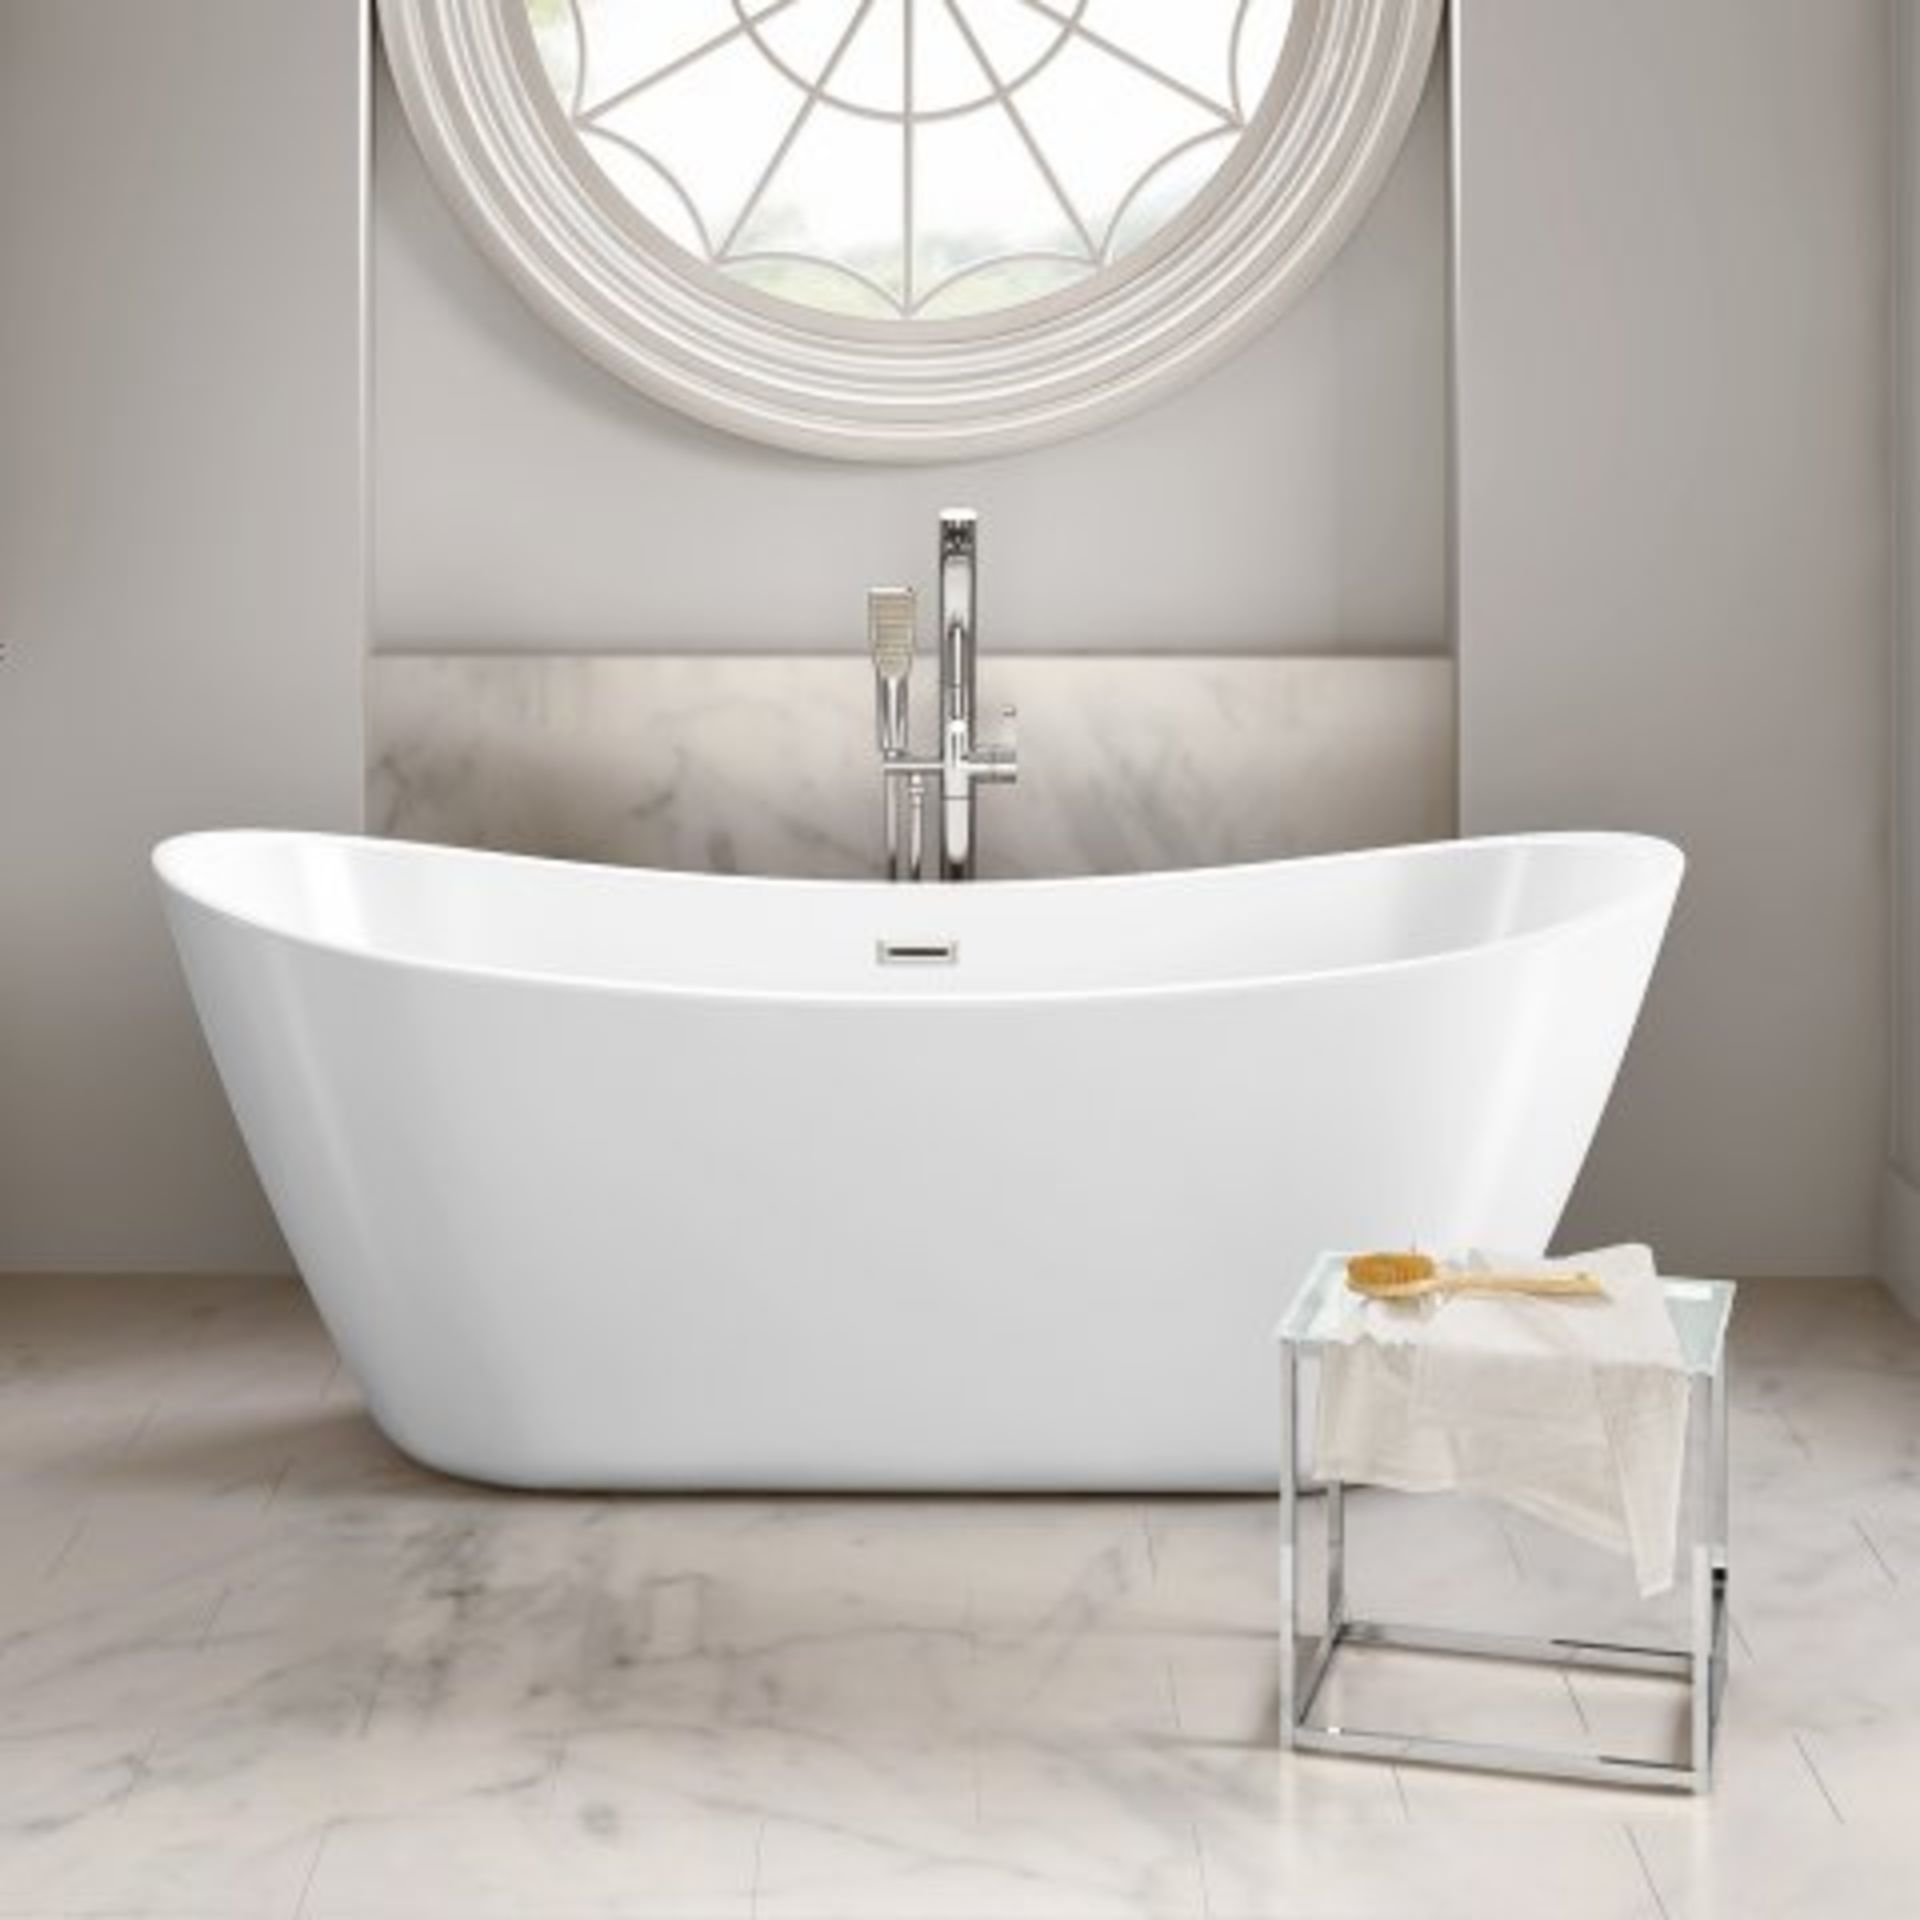 (H2) 1830mmx710mm Caitlyn Freestanding Bath - Large. RRP £1,499. Showcasing contemporary clean lines